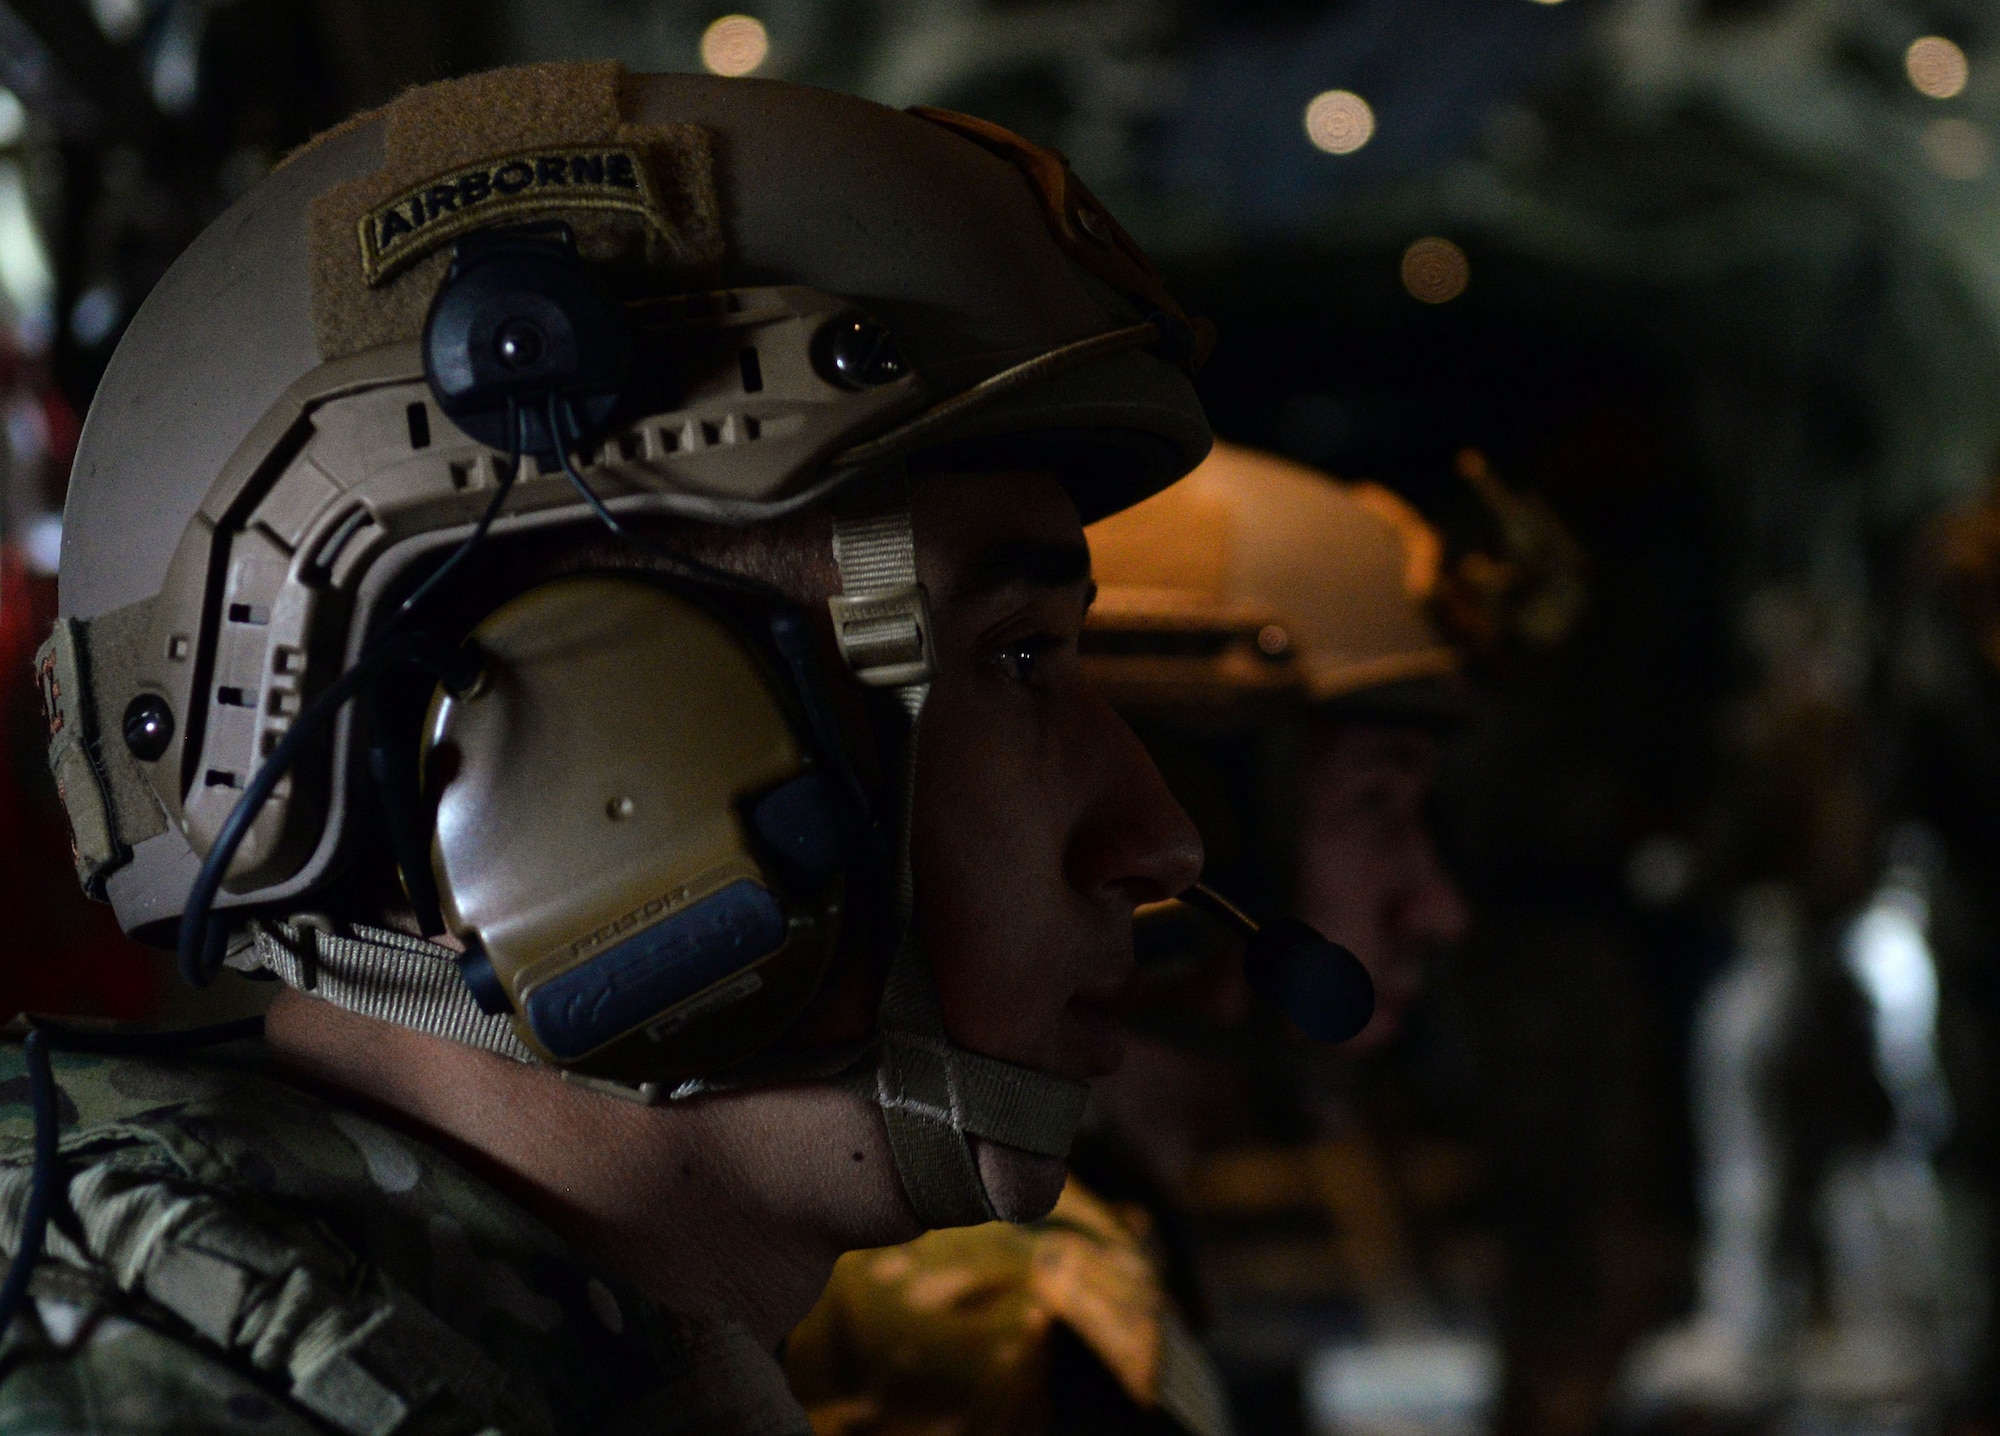 Two U.S. Air Force 352d Special Operations Squadron Deployed Aircraft Ground Response Element, or DAGRE, team members prepare for a Forward Arming and Refueling Point exercise July 26, 2017, on RAF Mildenhall, England. The DAGRE provides security for Air Force Special Operations aircraft transiting airfields where security is limited. (U.S. Air Force photo by Airman 1st Class Luke Milano)